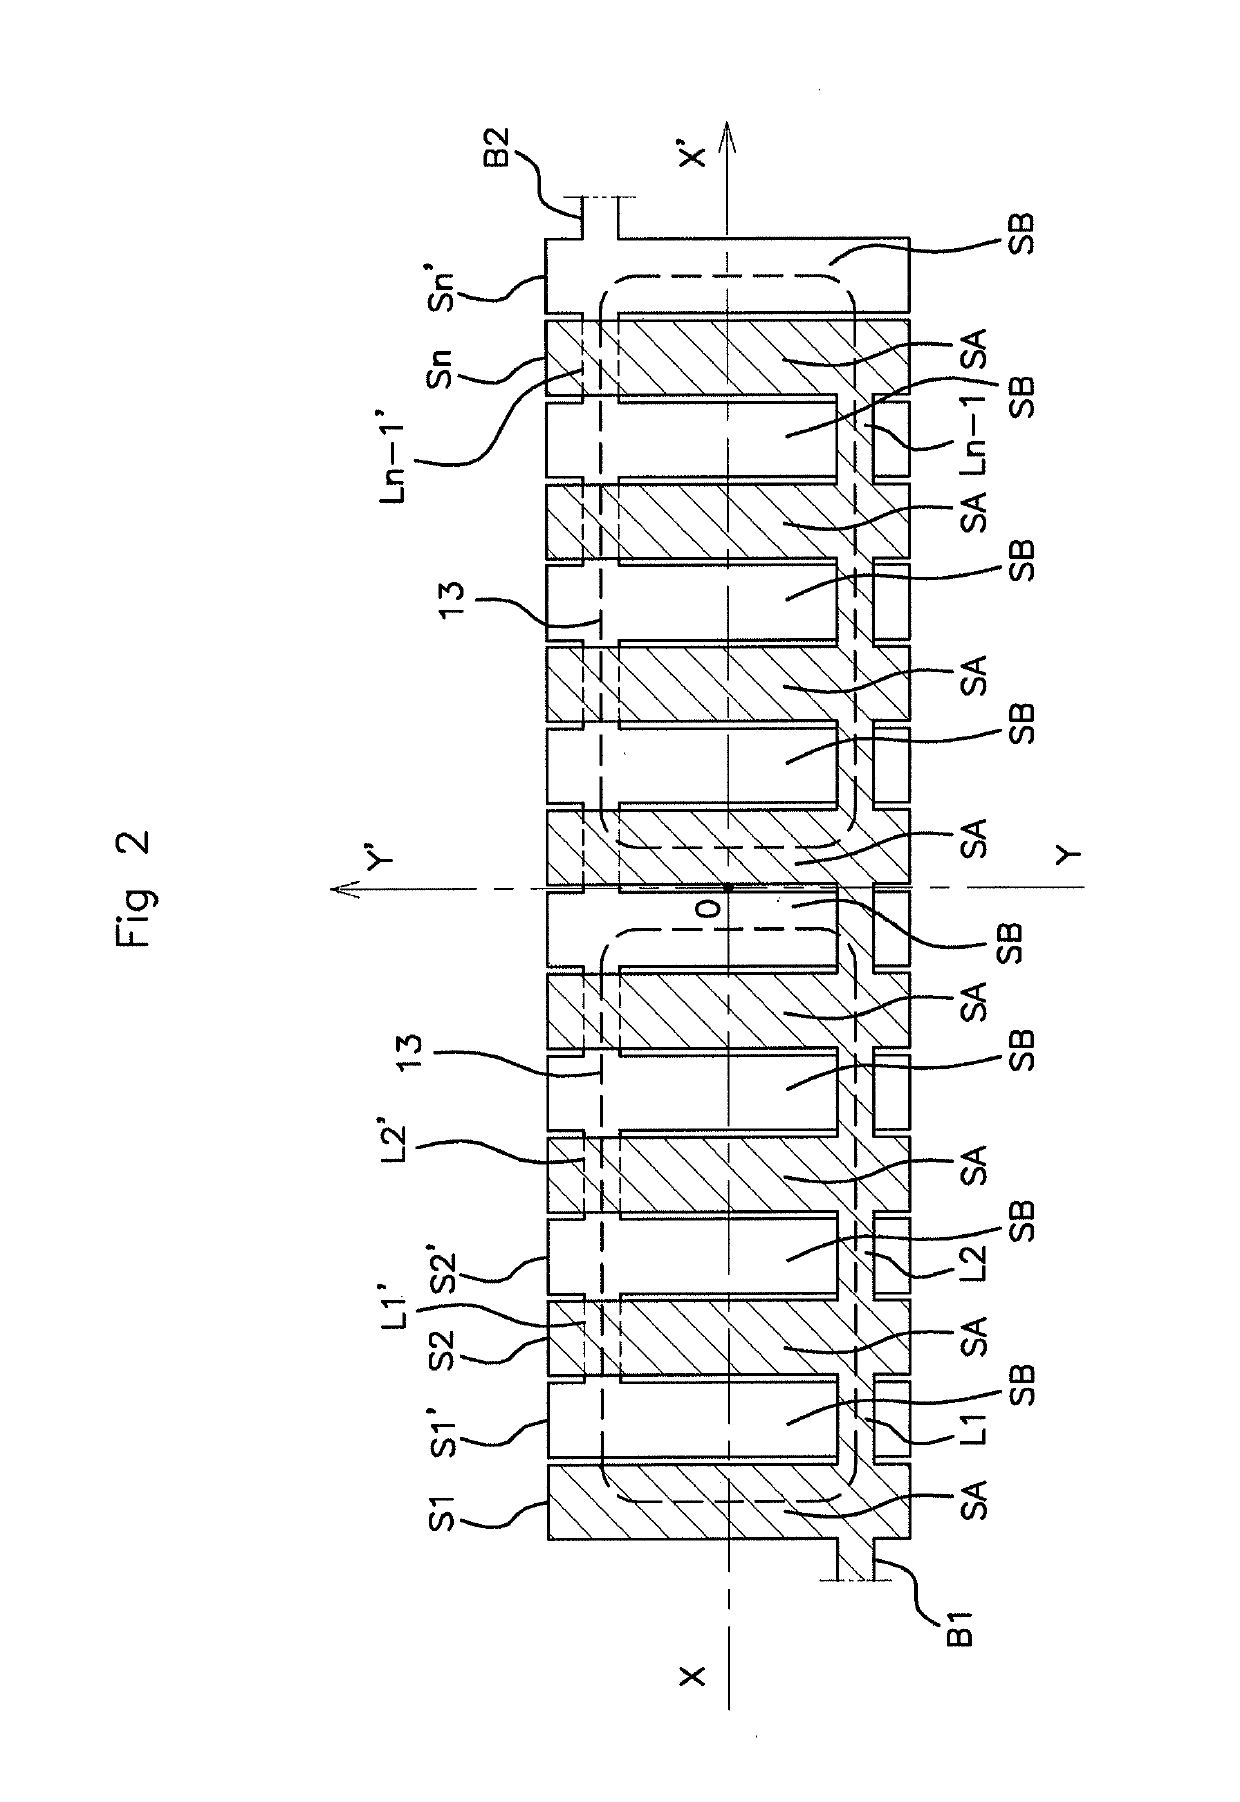 Device for detecting a parasitic metallic object in the emission zone of a device for recharging a user apparatus for an automotive vehicle and associated detection method